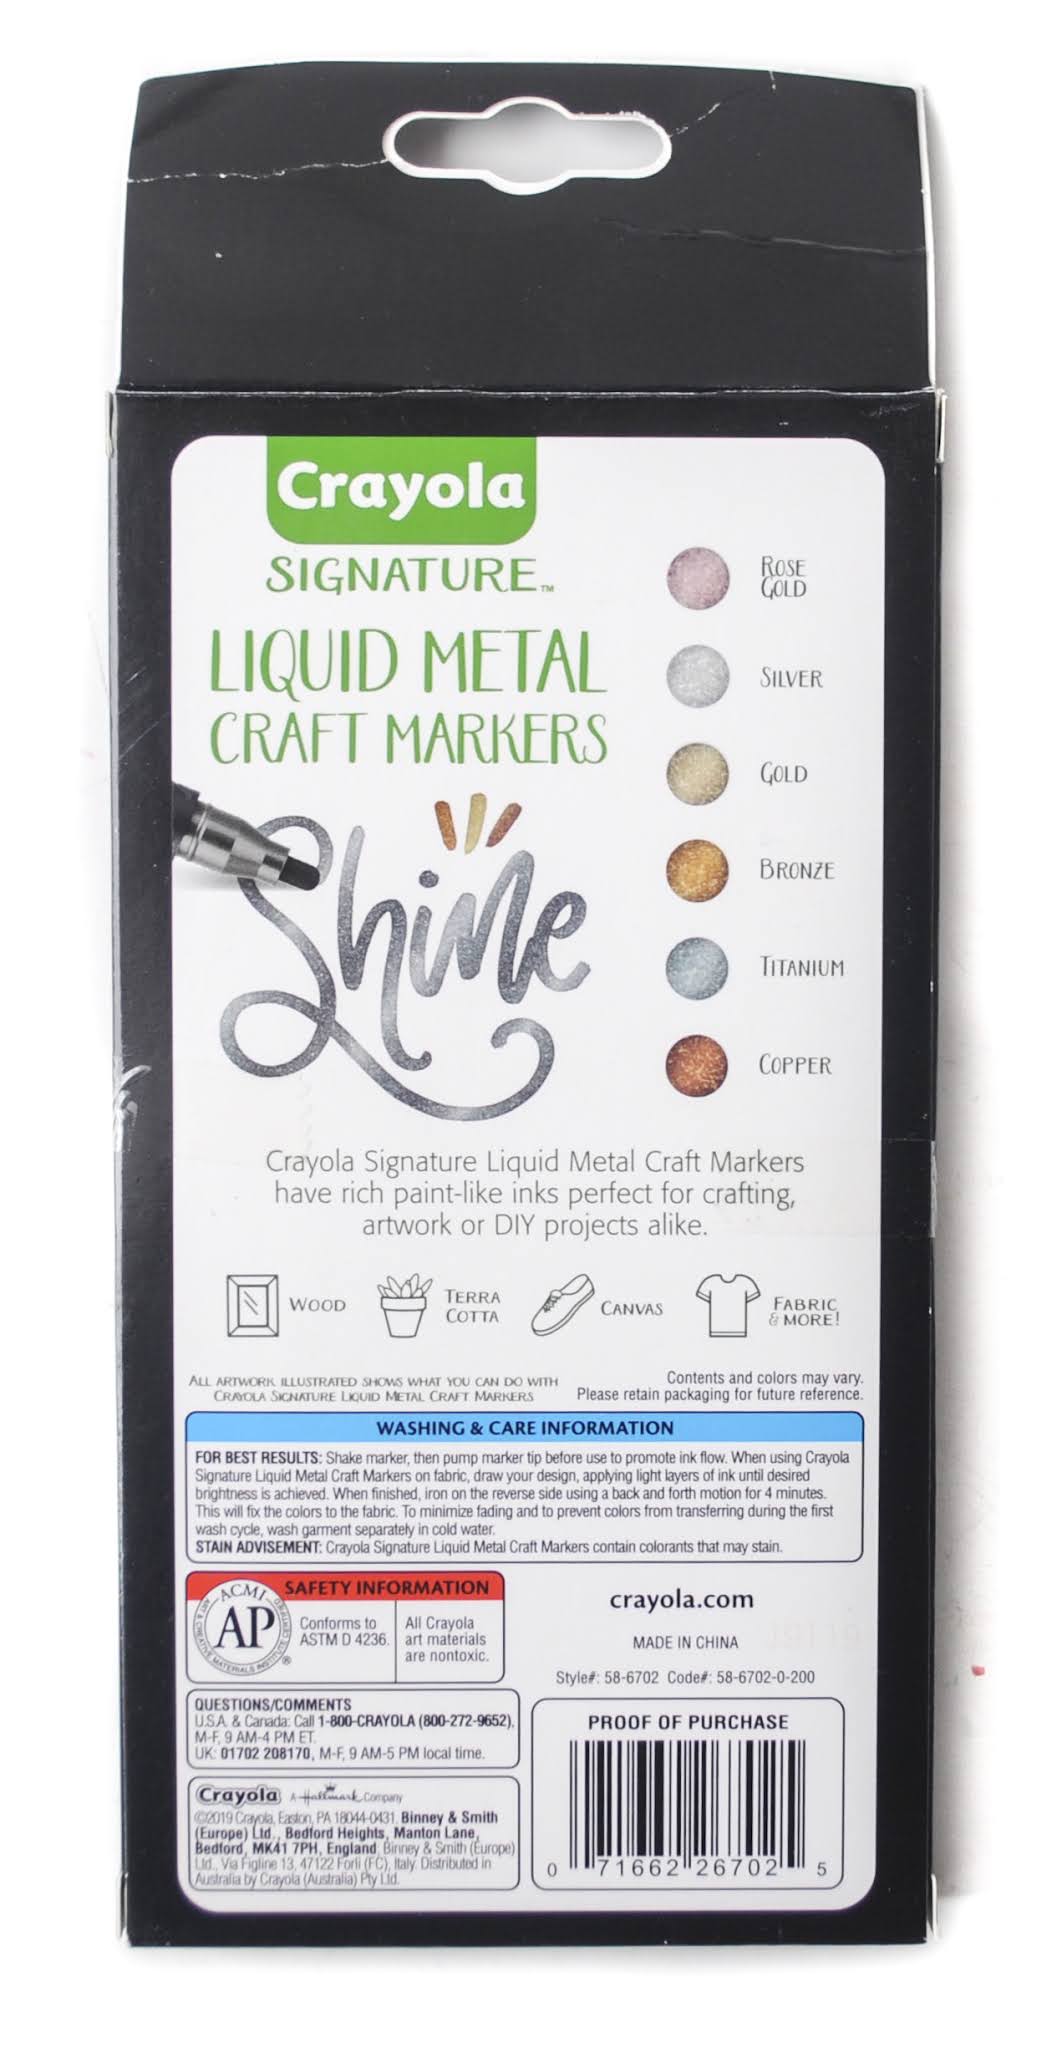 Crayola signature outline markers Metallic Be Inspired